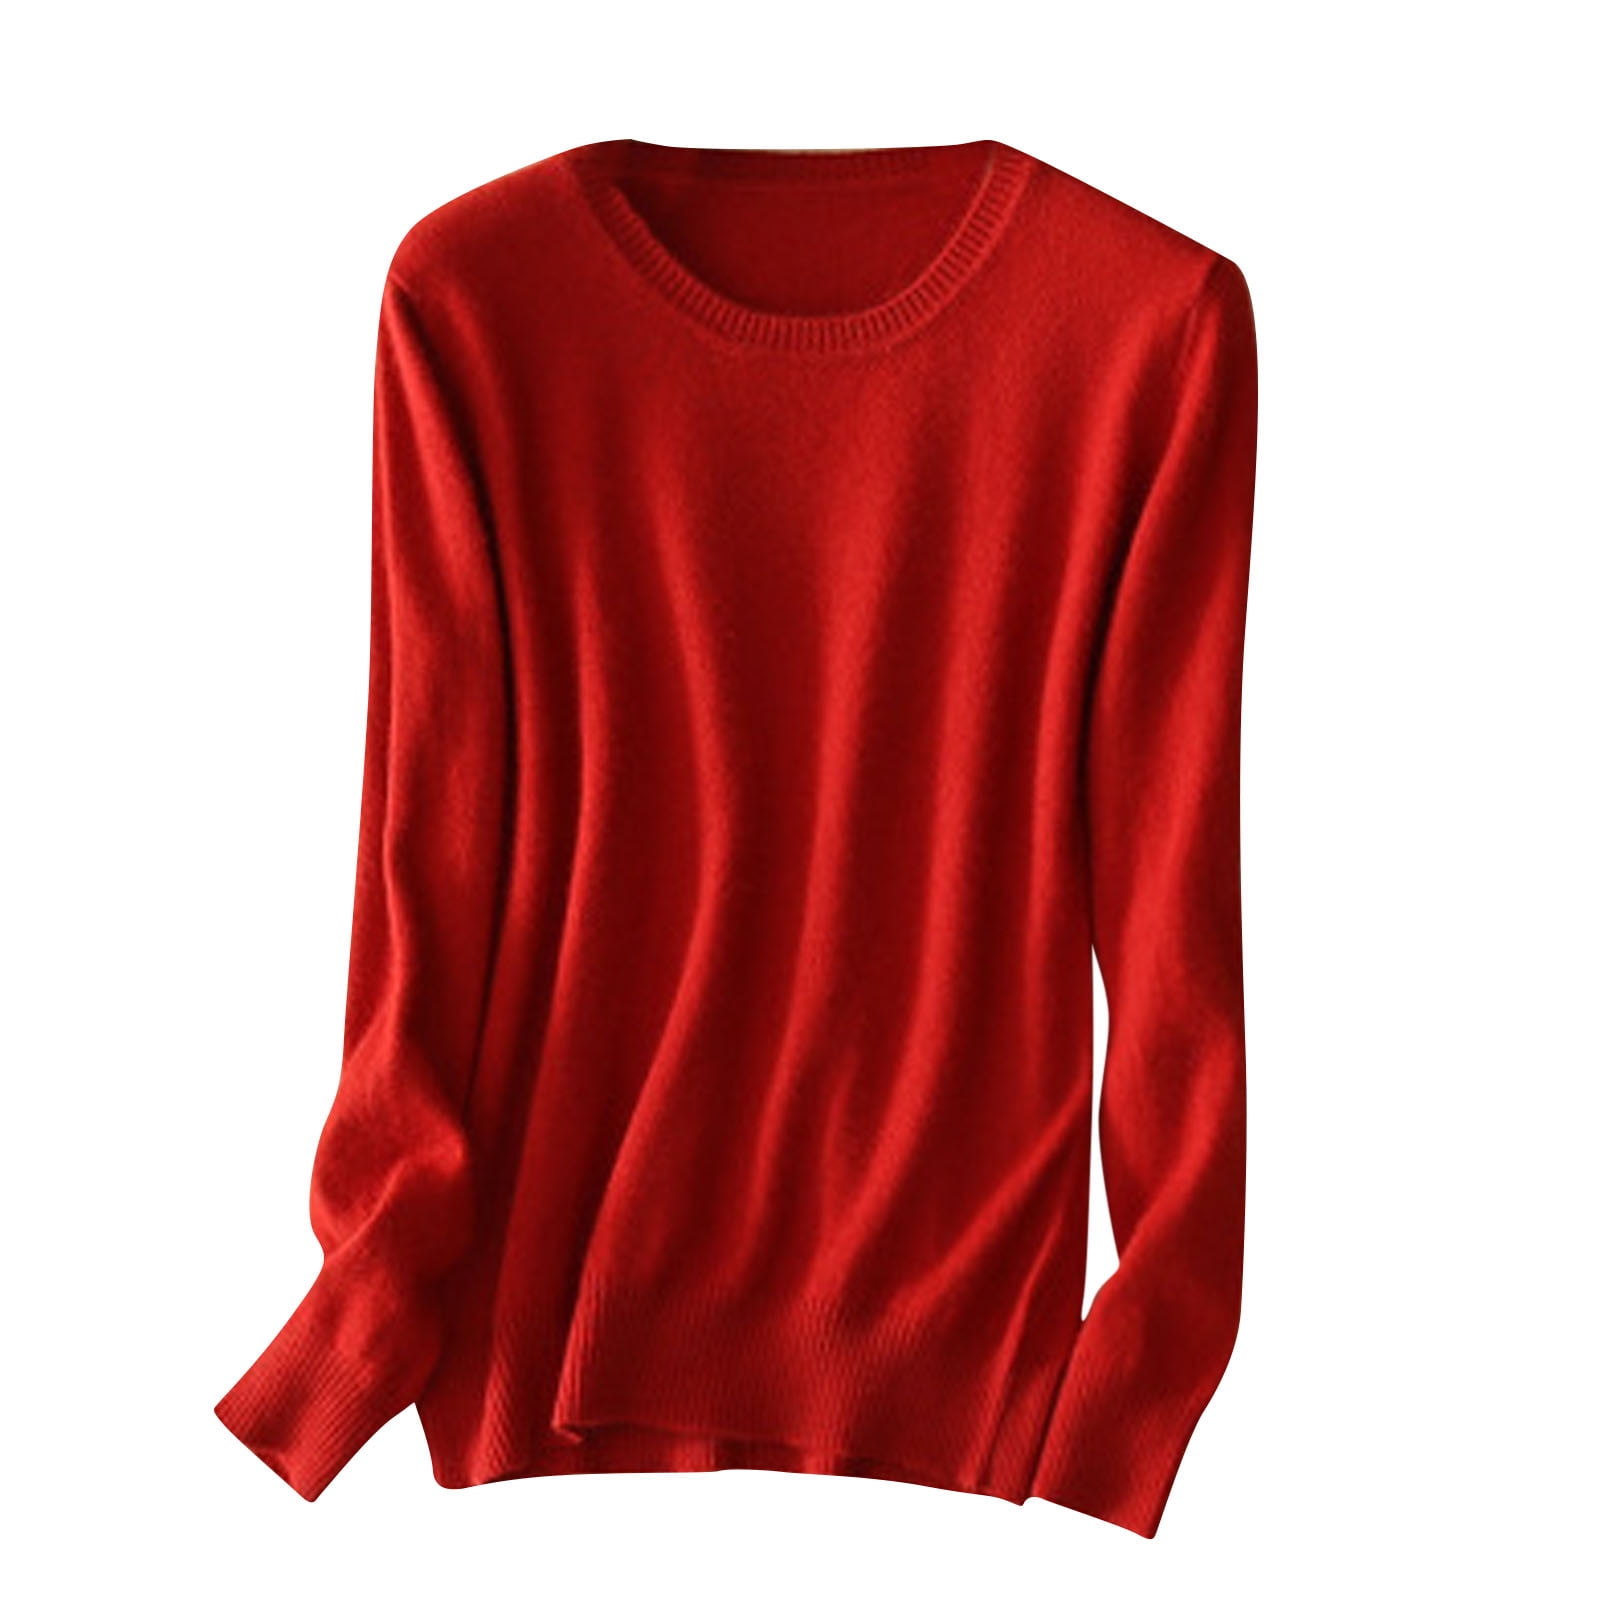 Women 's Spring Long Sleeve Tops Casual Loose Blouses Crew Neck